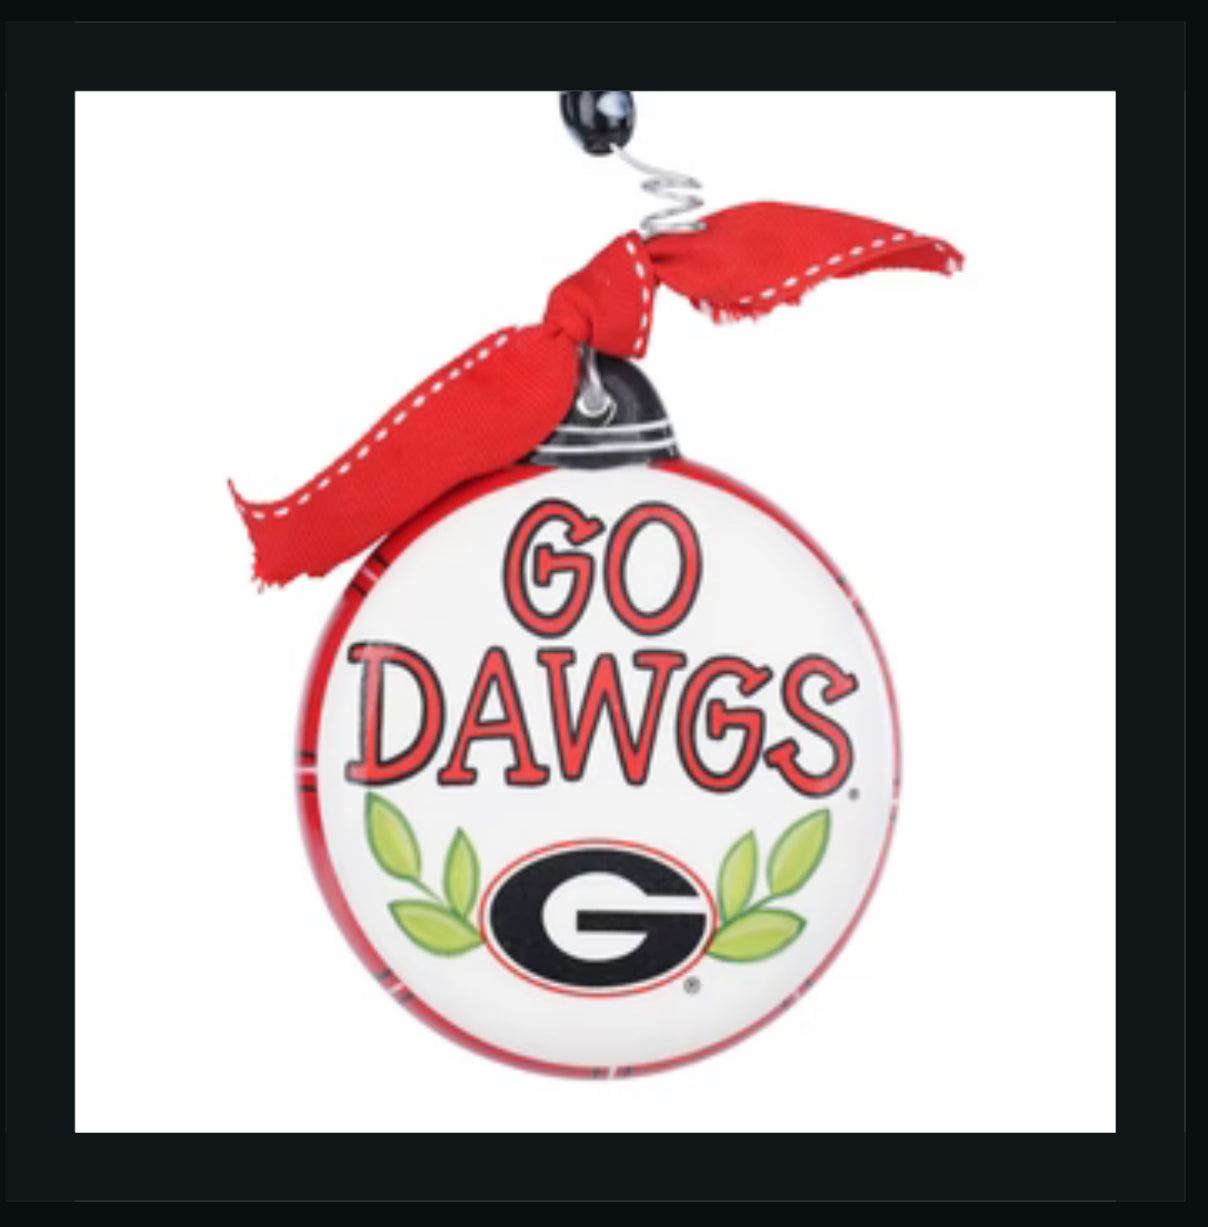 Christmas ornament featuring "Go Dawgs" in red lettering with the "G" emblem.